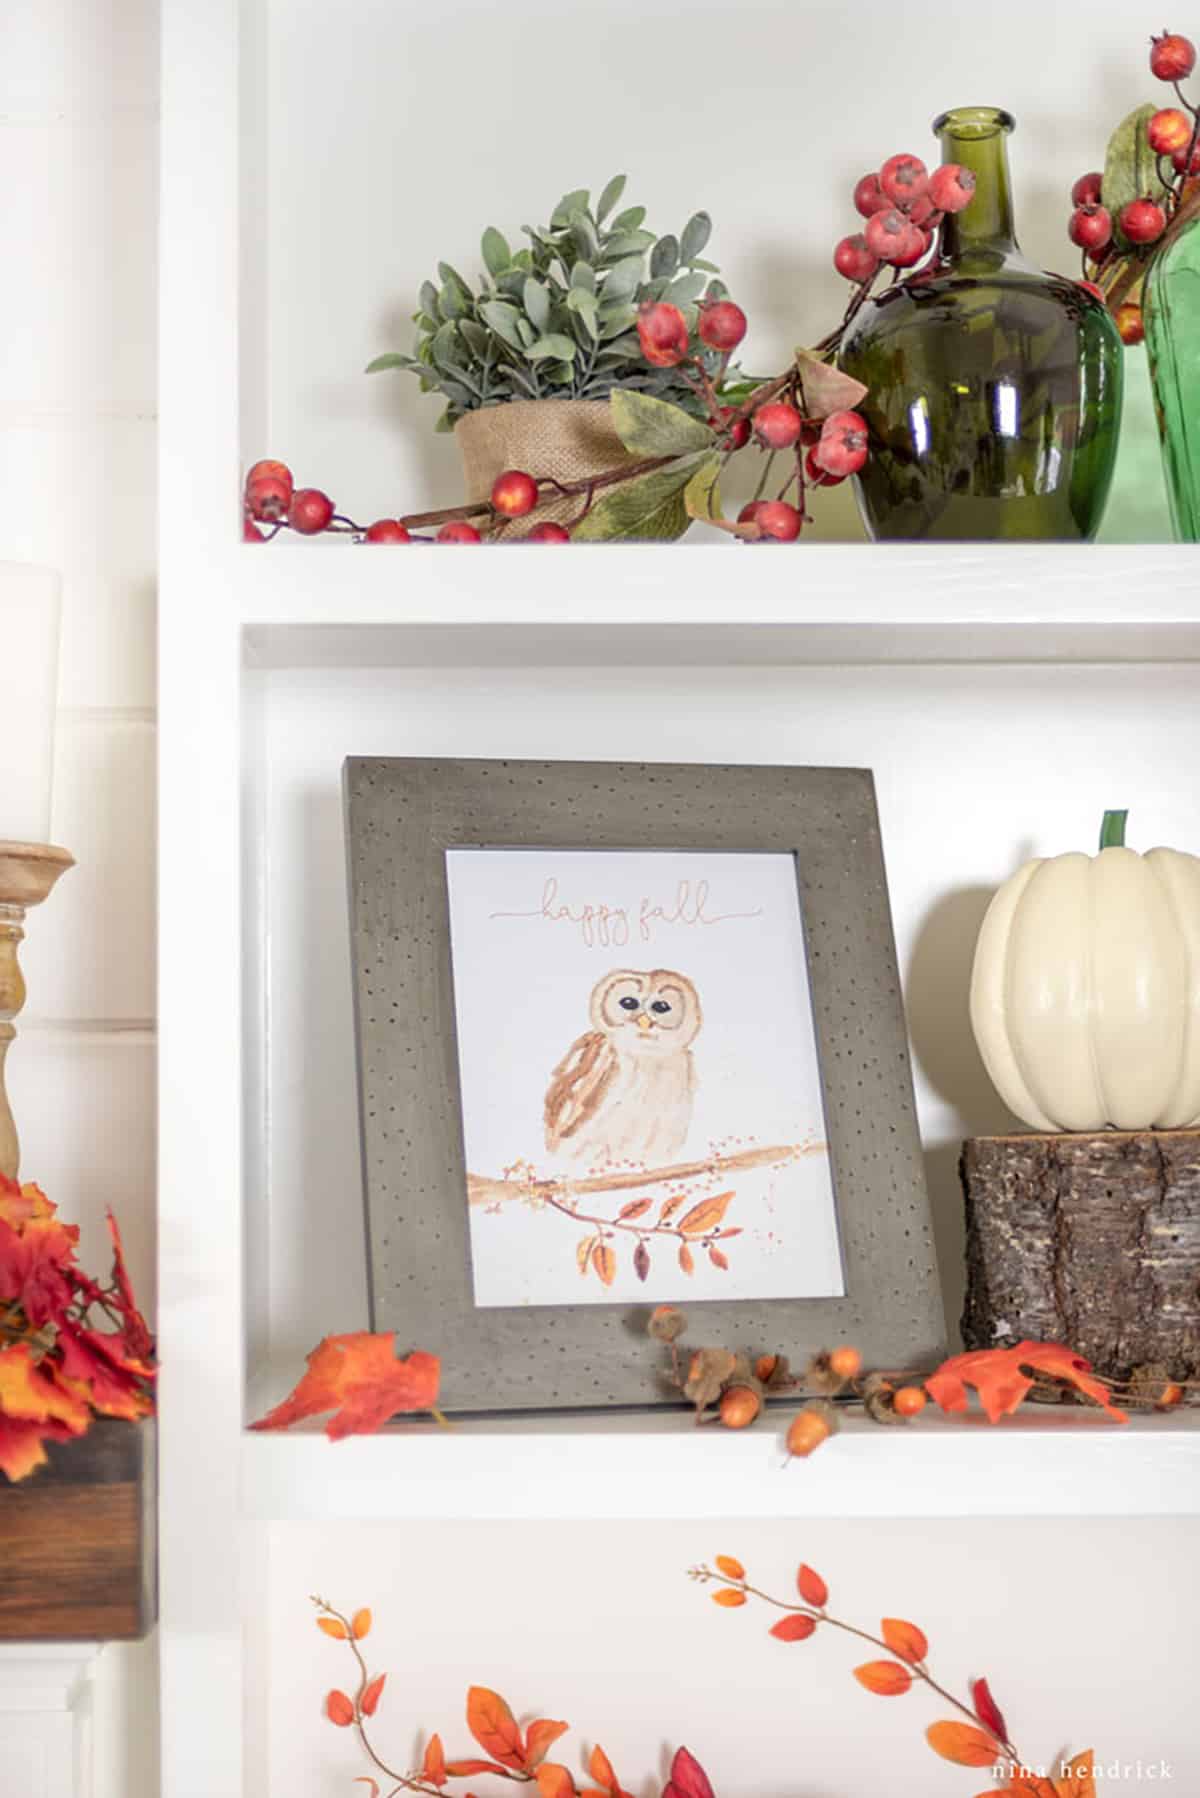 A white shelf with fall decorations and a free "Happy Fall" printable featuring an owl.